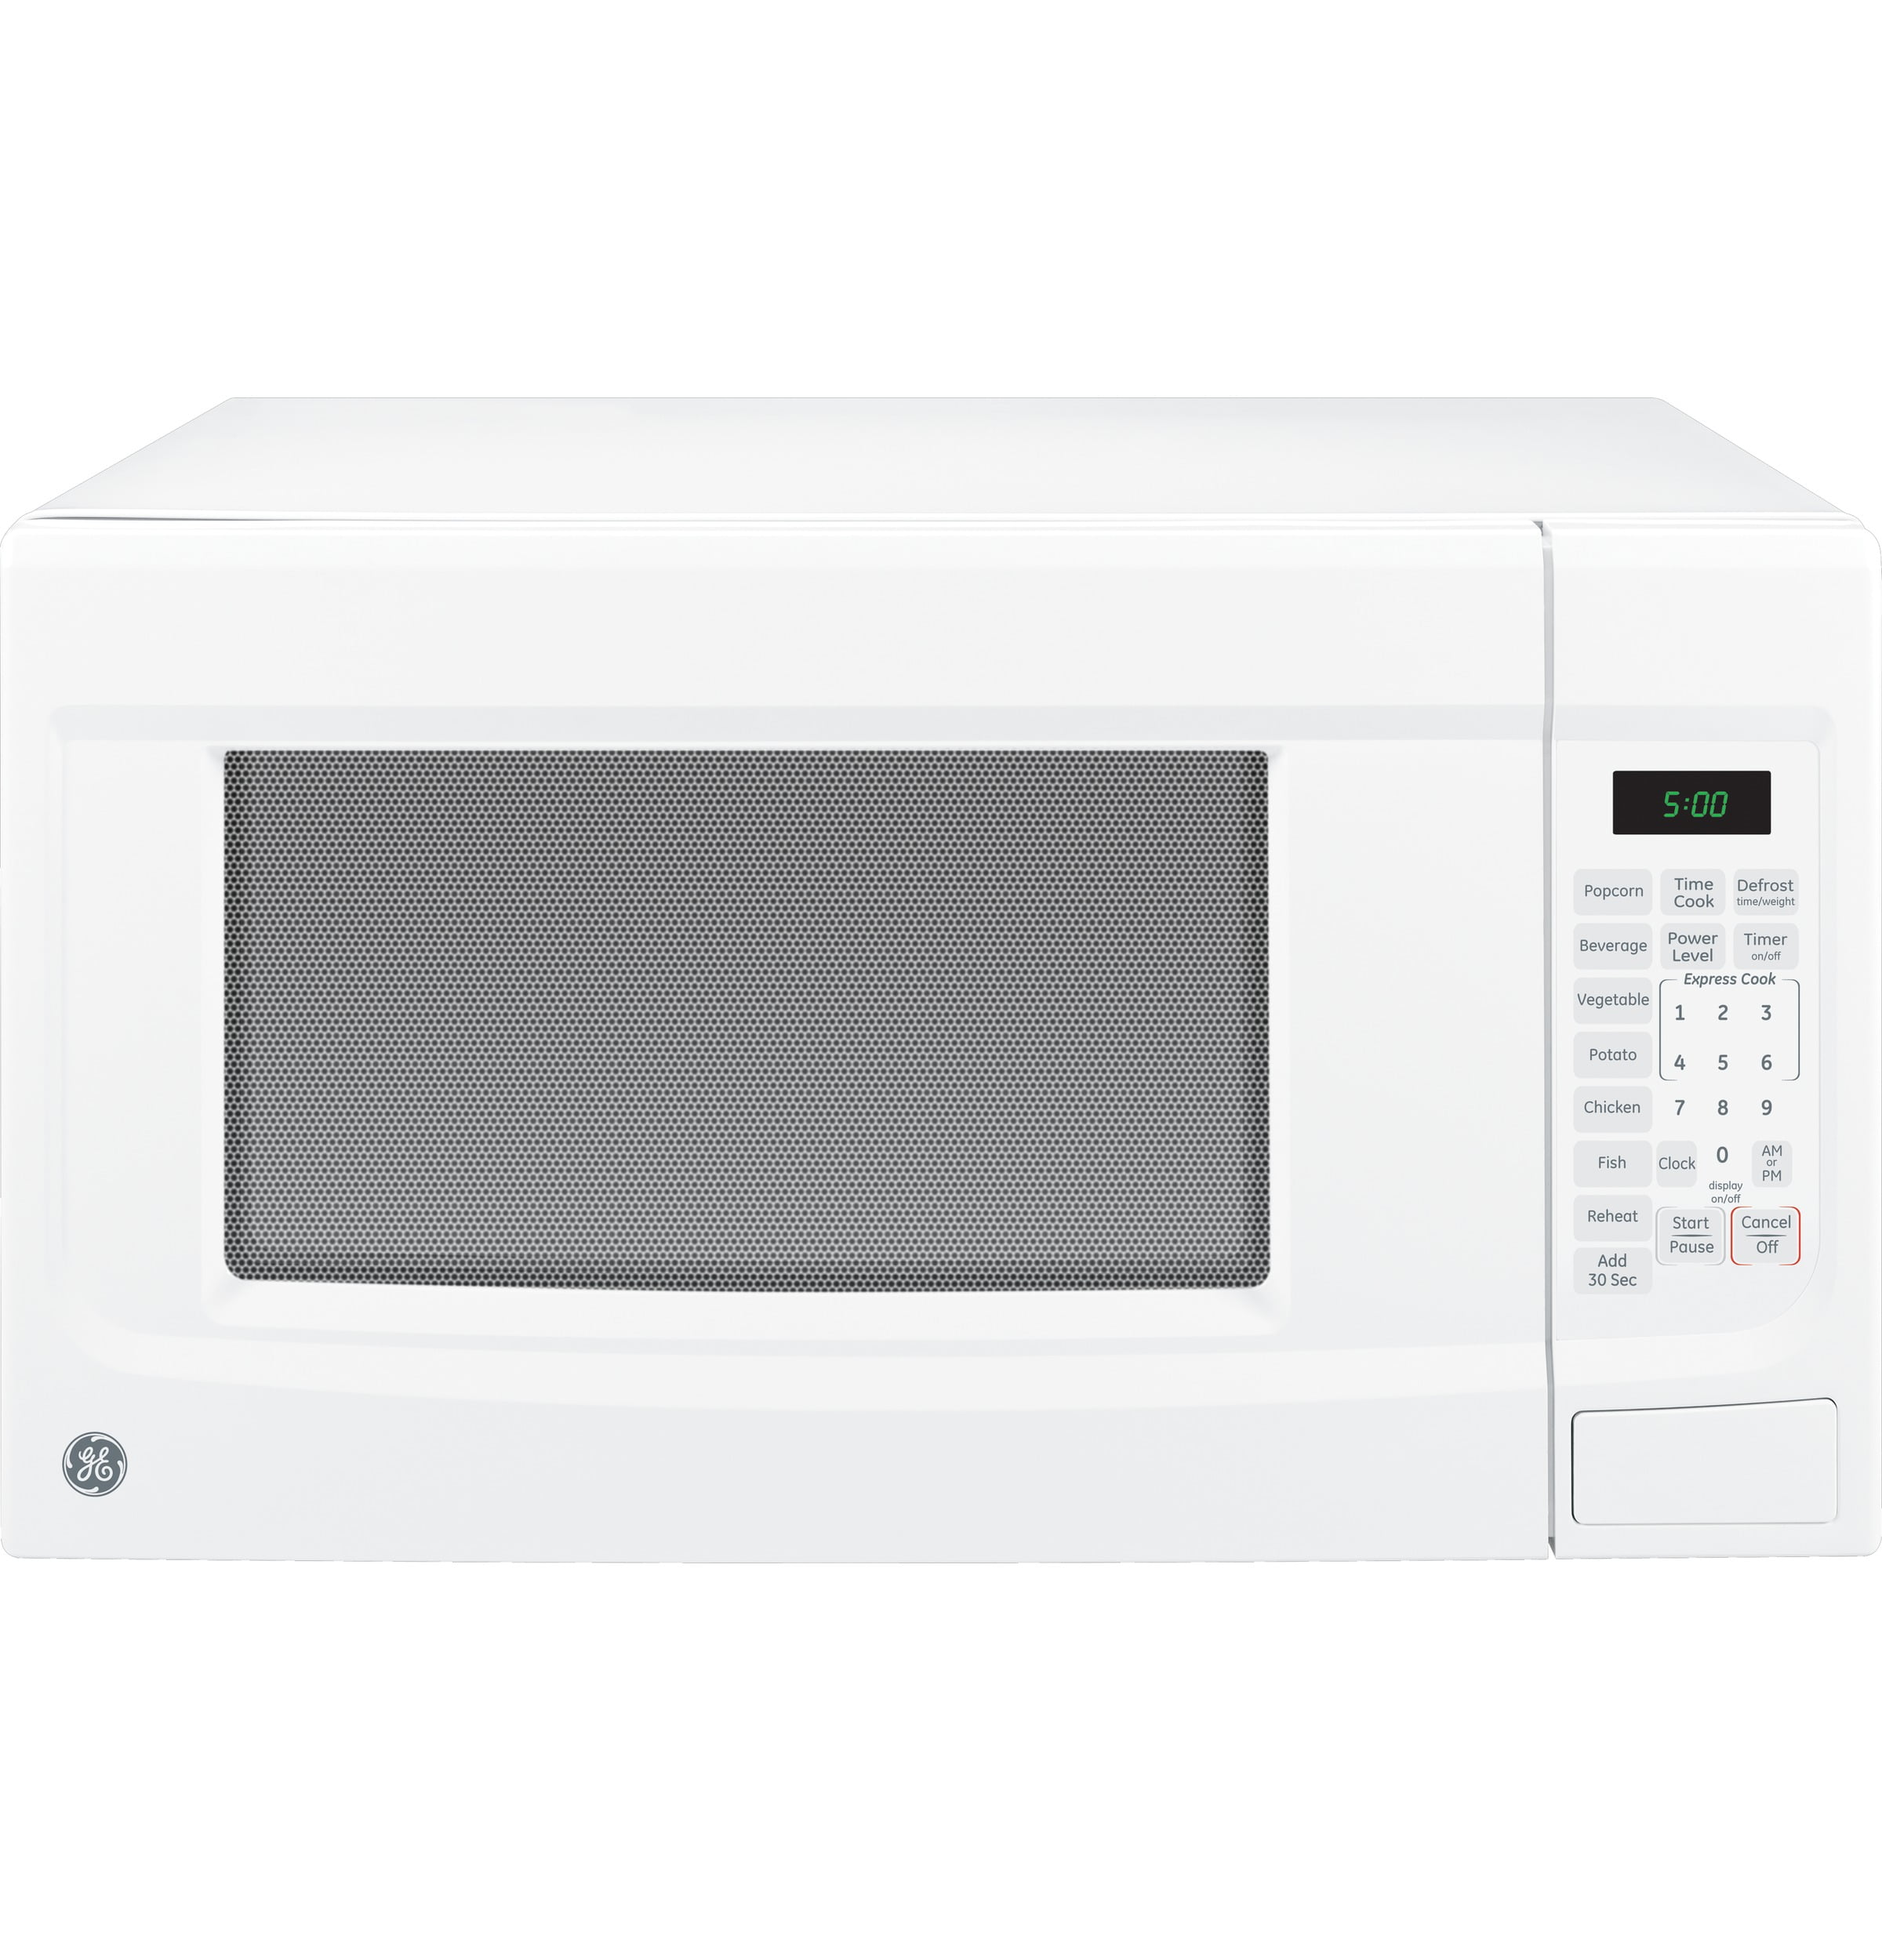 Toshiba 1.1 Cu. ft. Microwave Oven, Stainless Steel, EM031M2EC-CHSS 